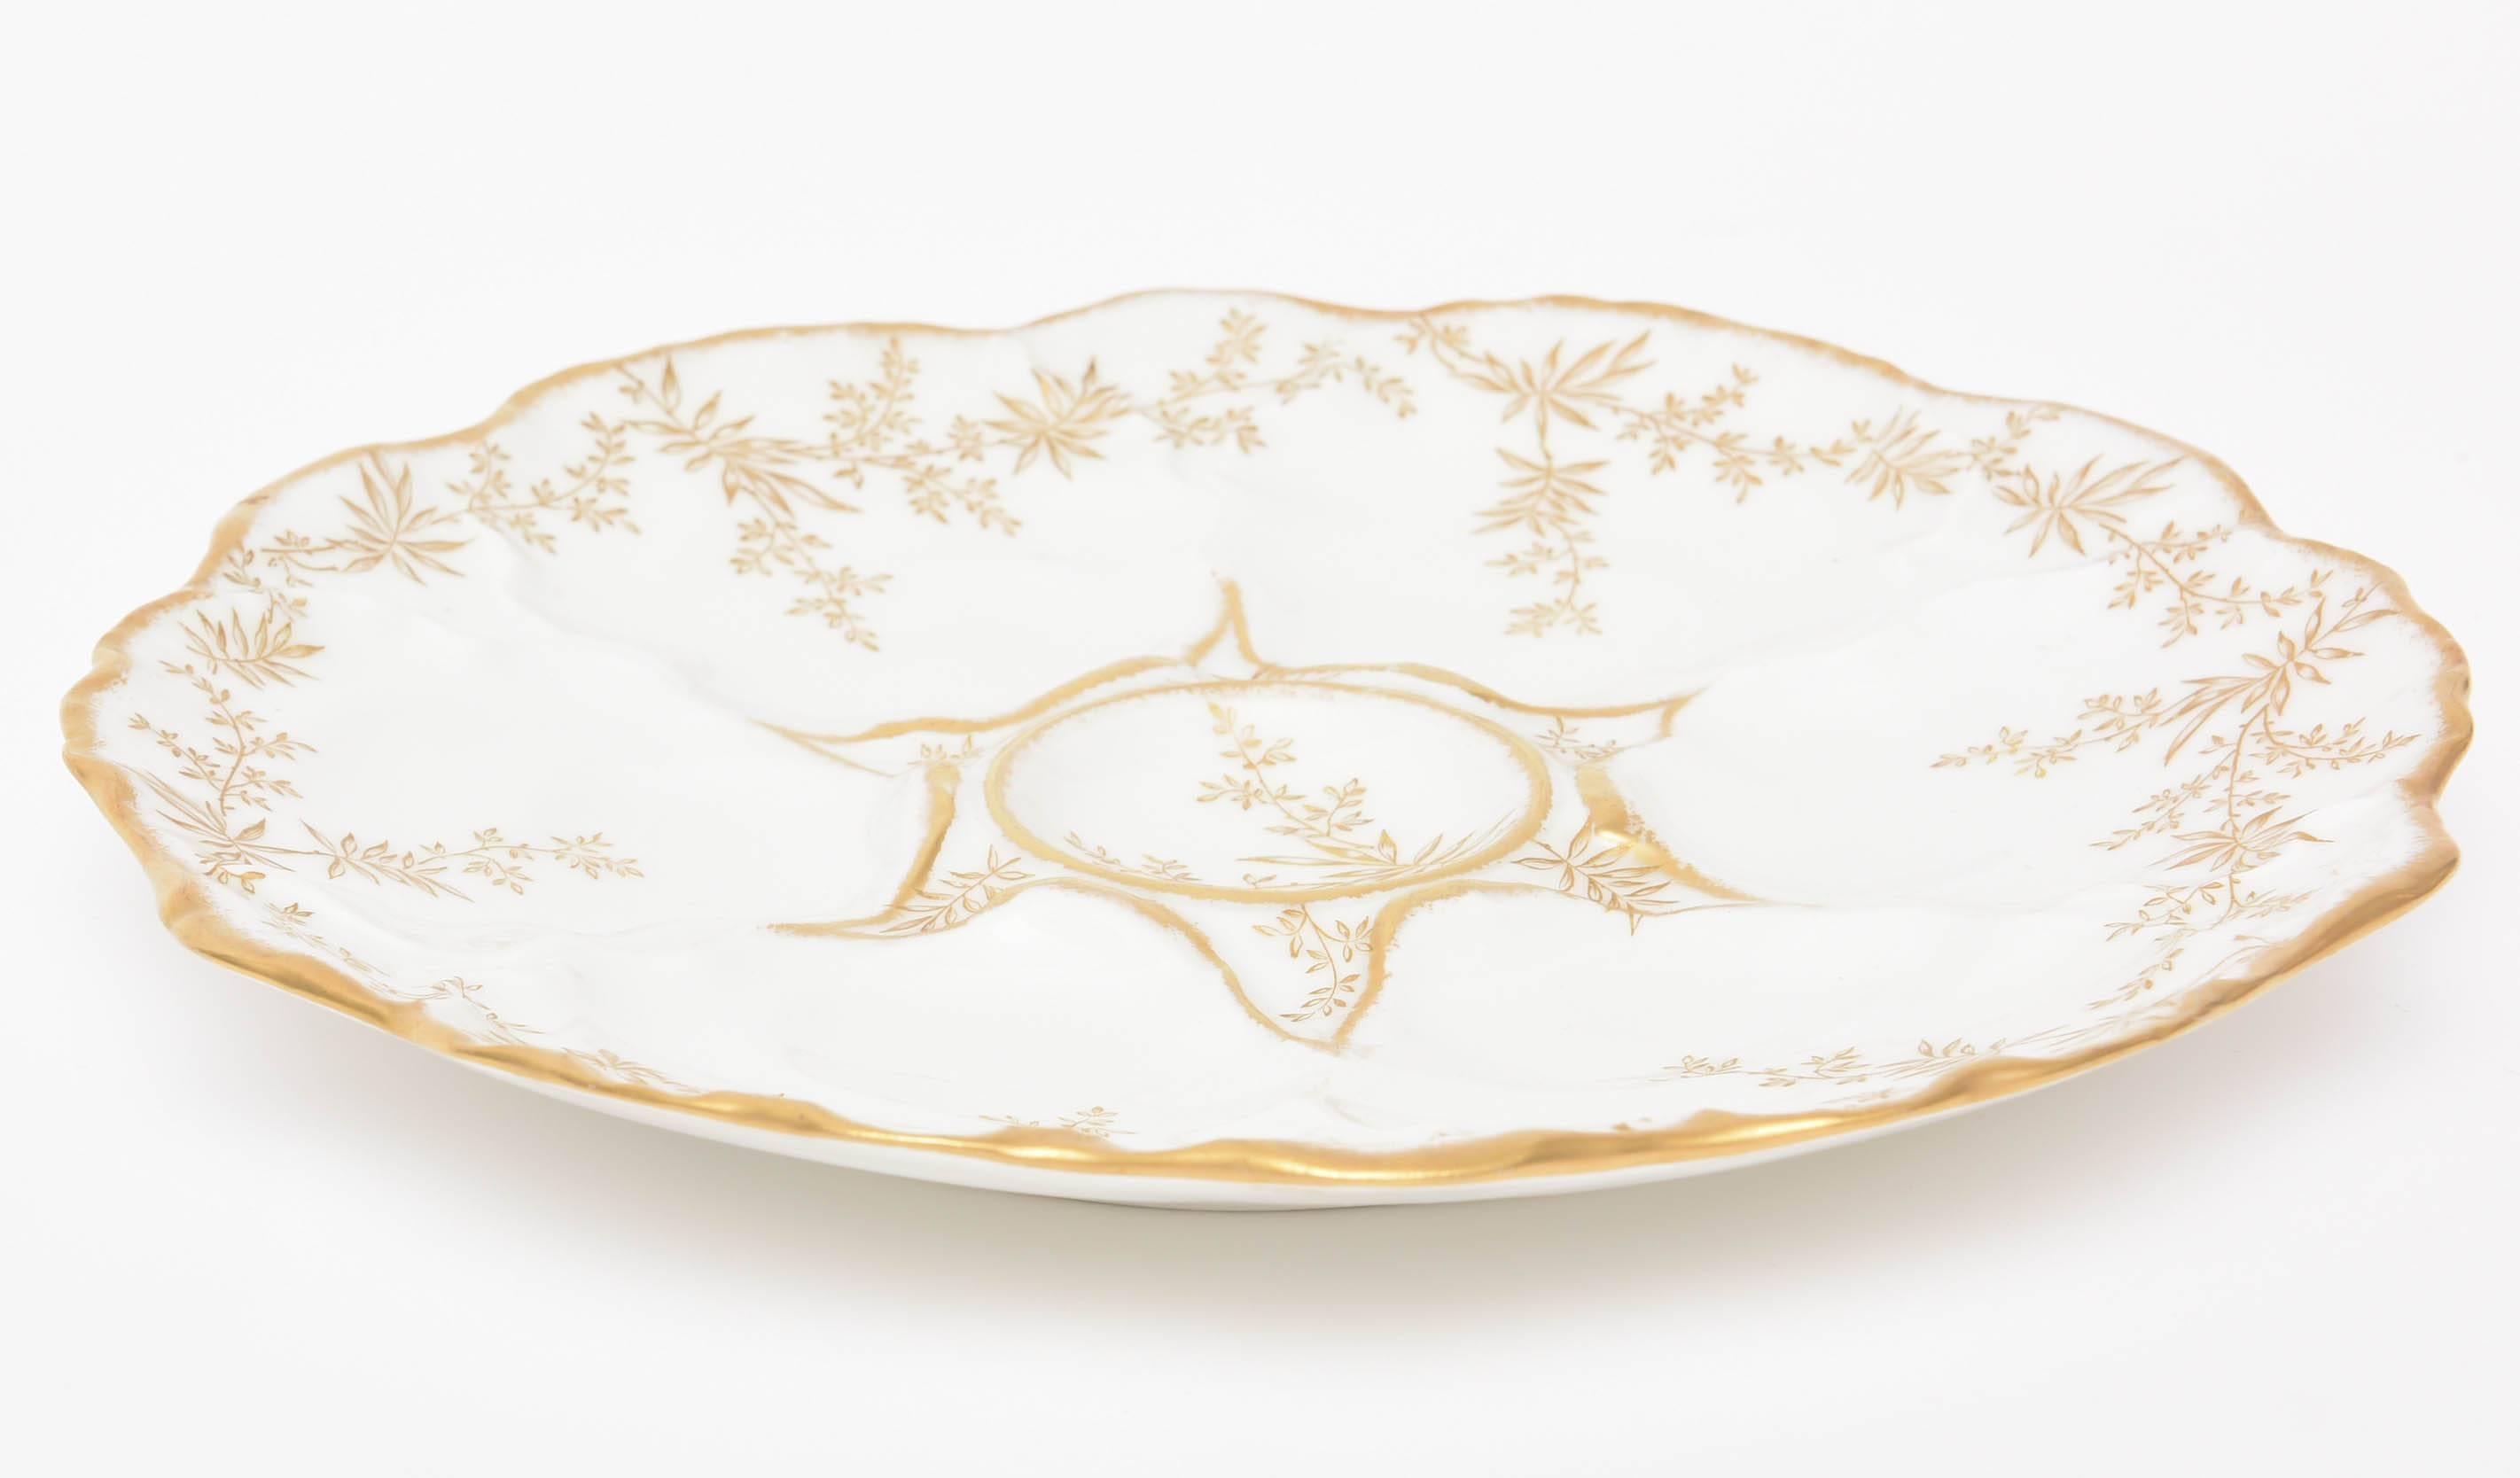 Late 19th Century Oyster Plate by Limoges France, Scalloped Shape and Hand Painted Gold